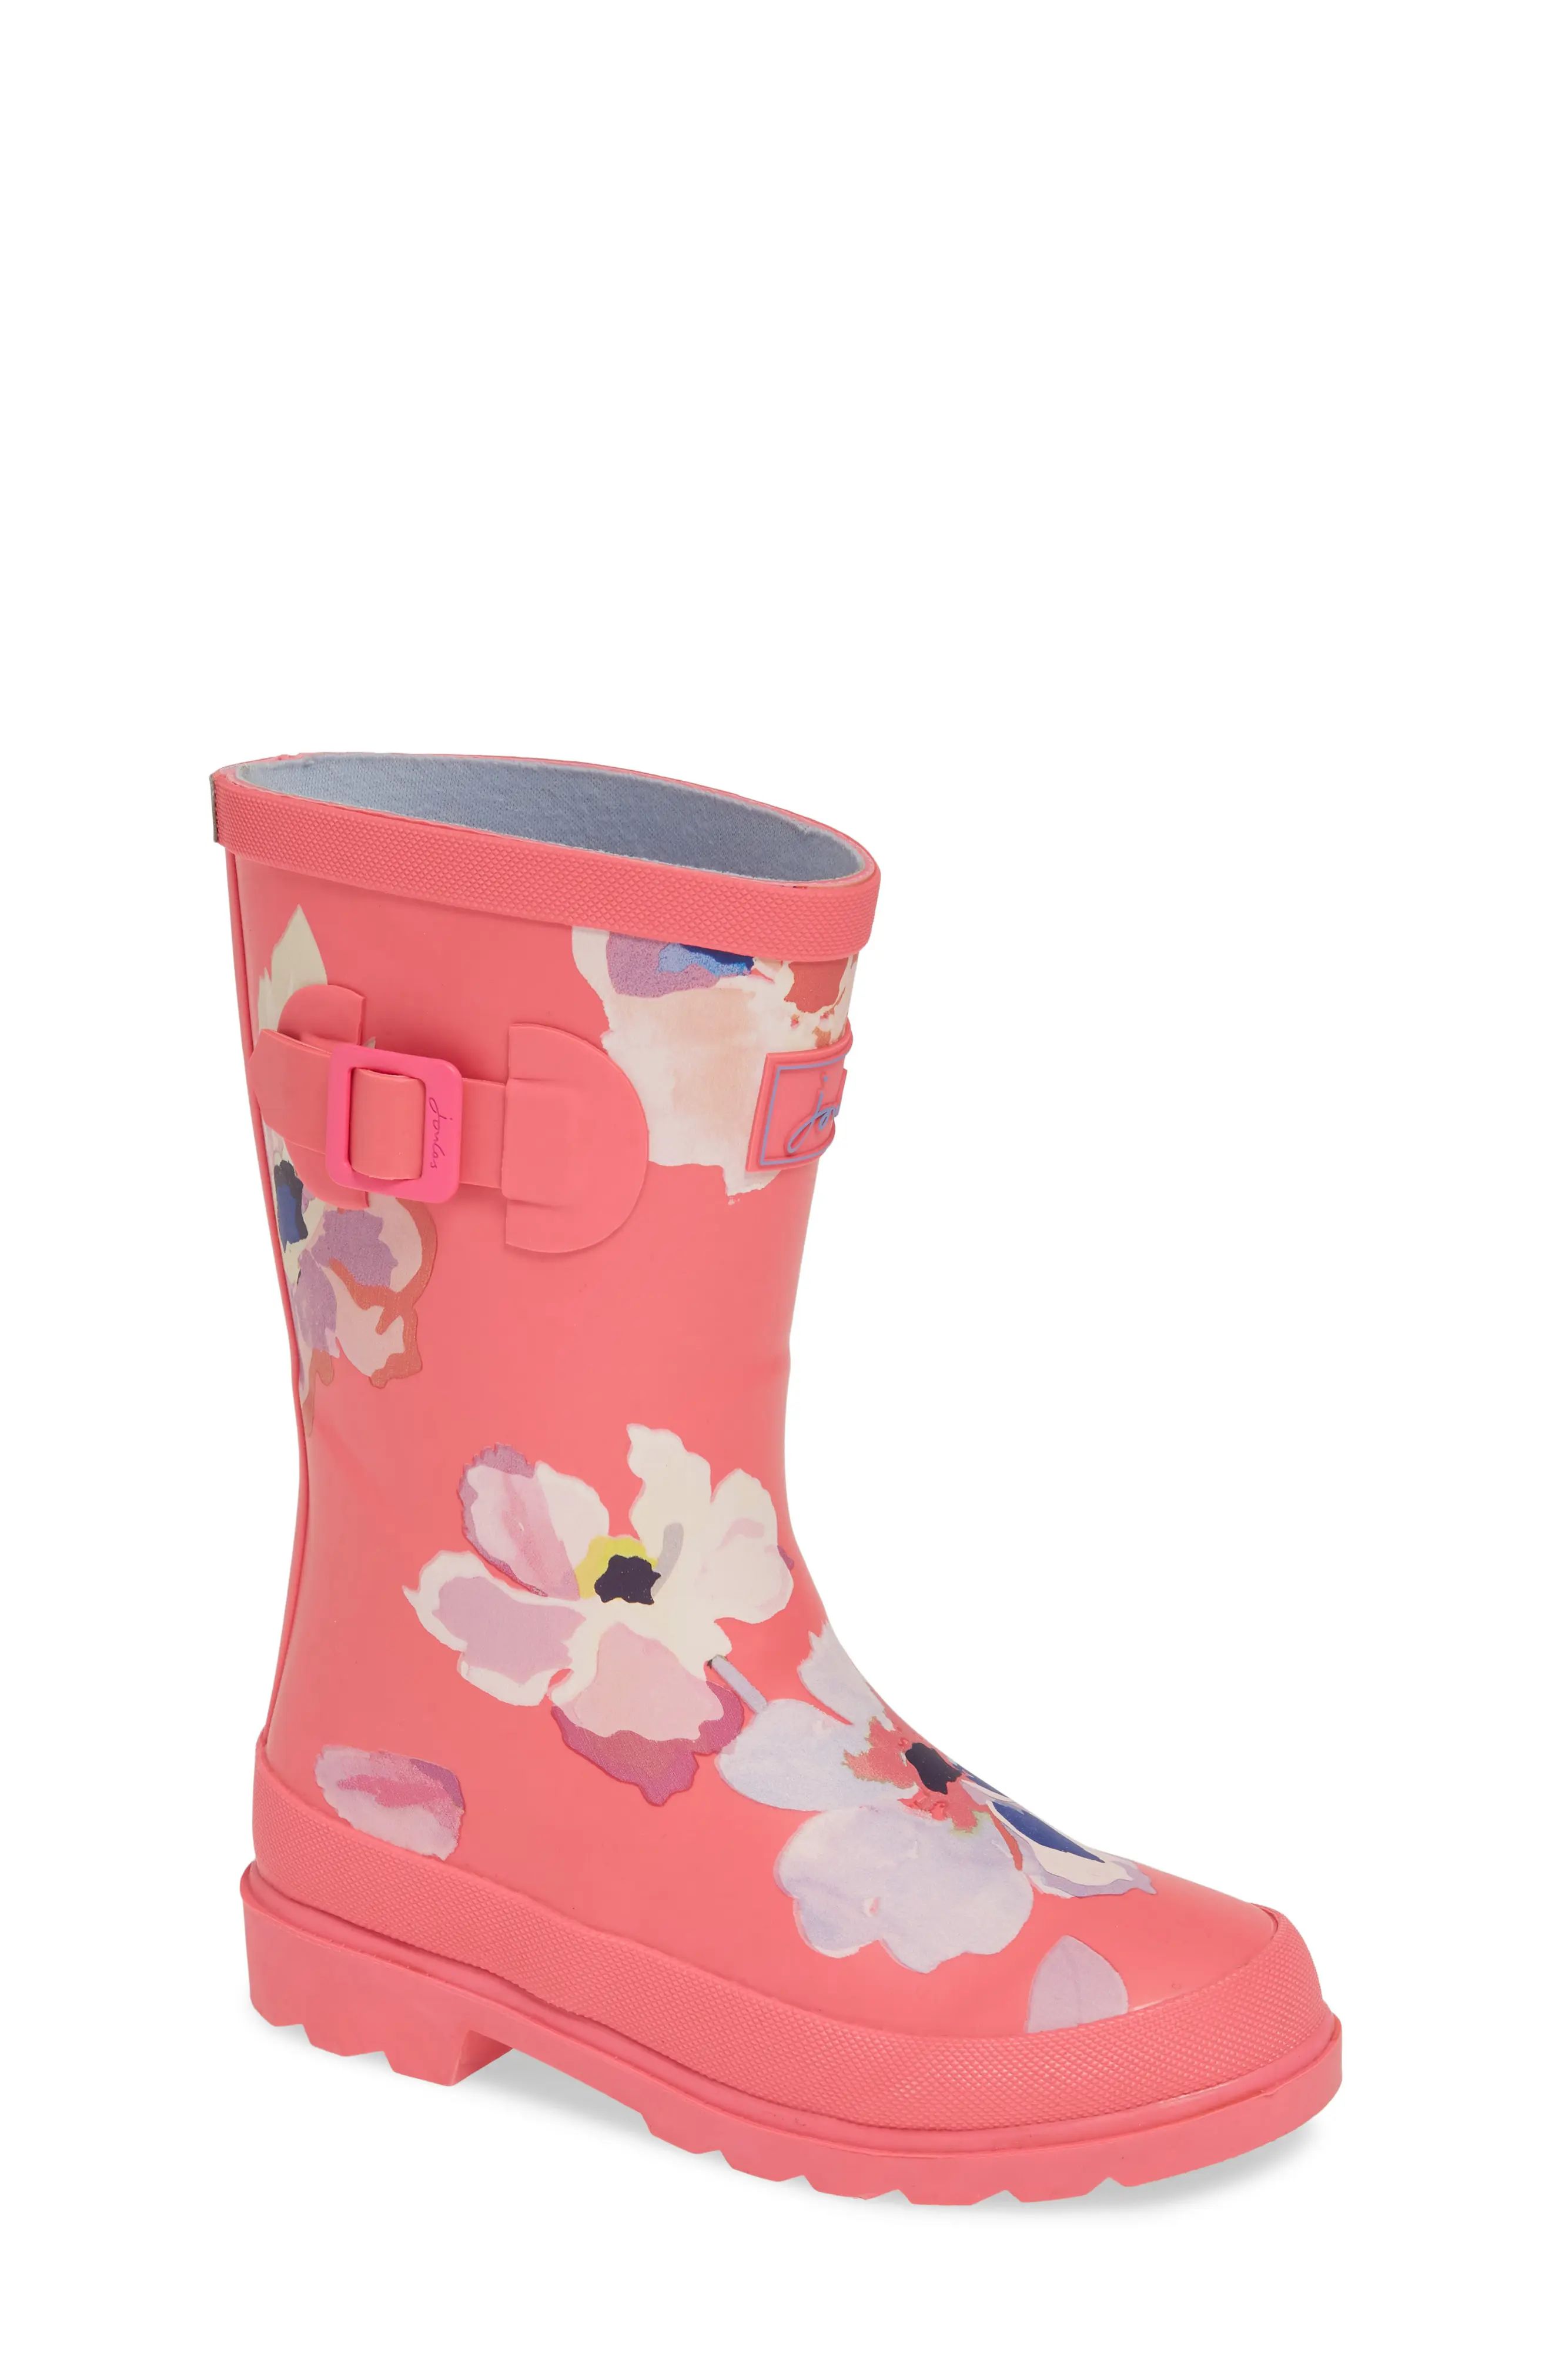 Girl's Joules Mid Height Print Welly Waterproof Rain Boot, Size 1 M - Pink | Nordstrom